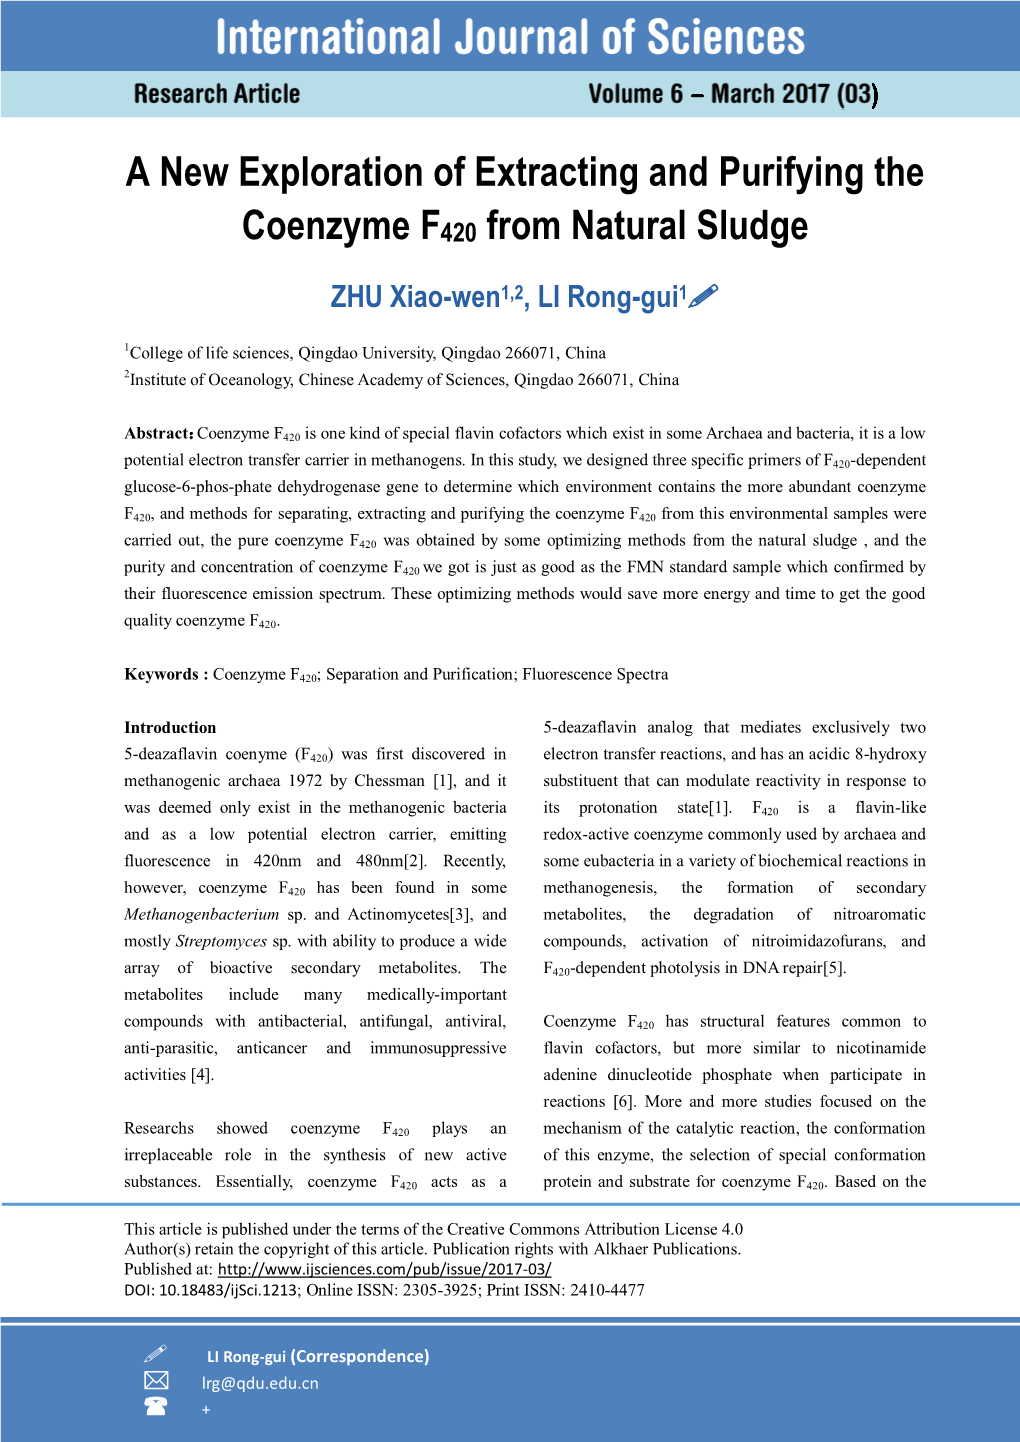 A New Exploration of Extracting and Purifying the Coenzyme F420 from Natural Sludge